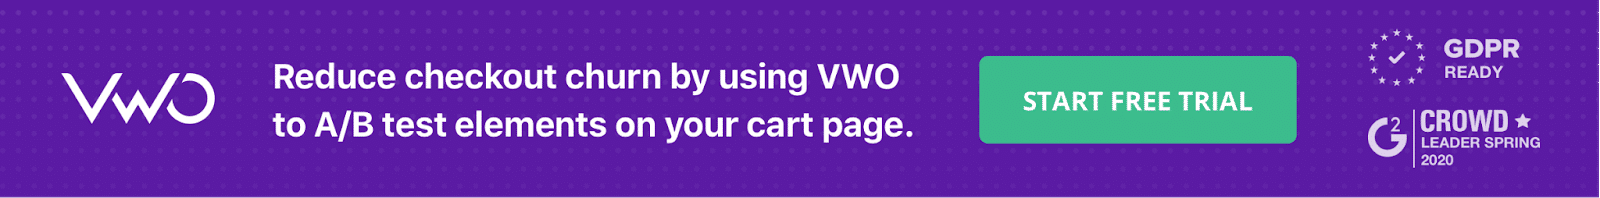 Reduce Checkout Churn with VWO